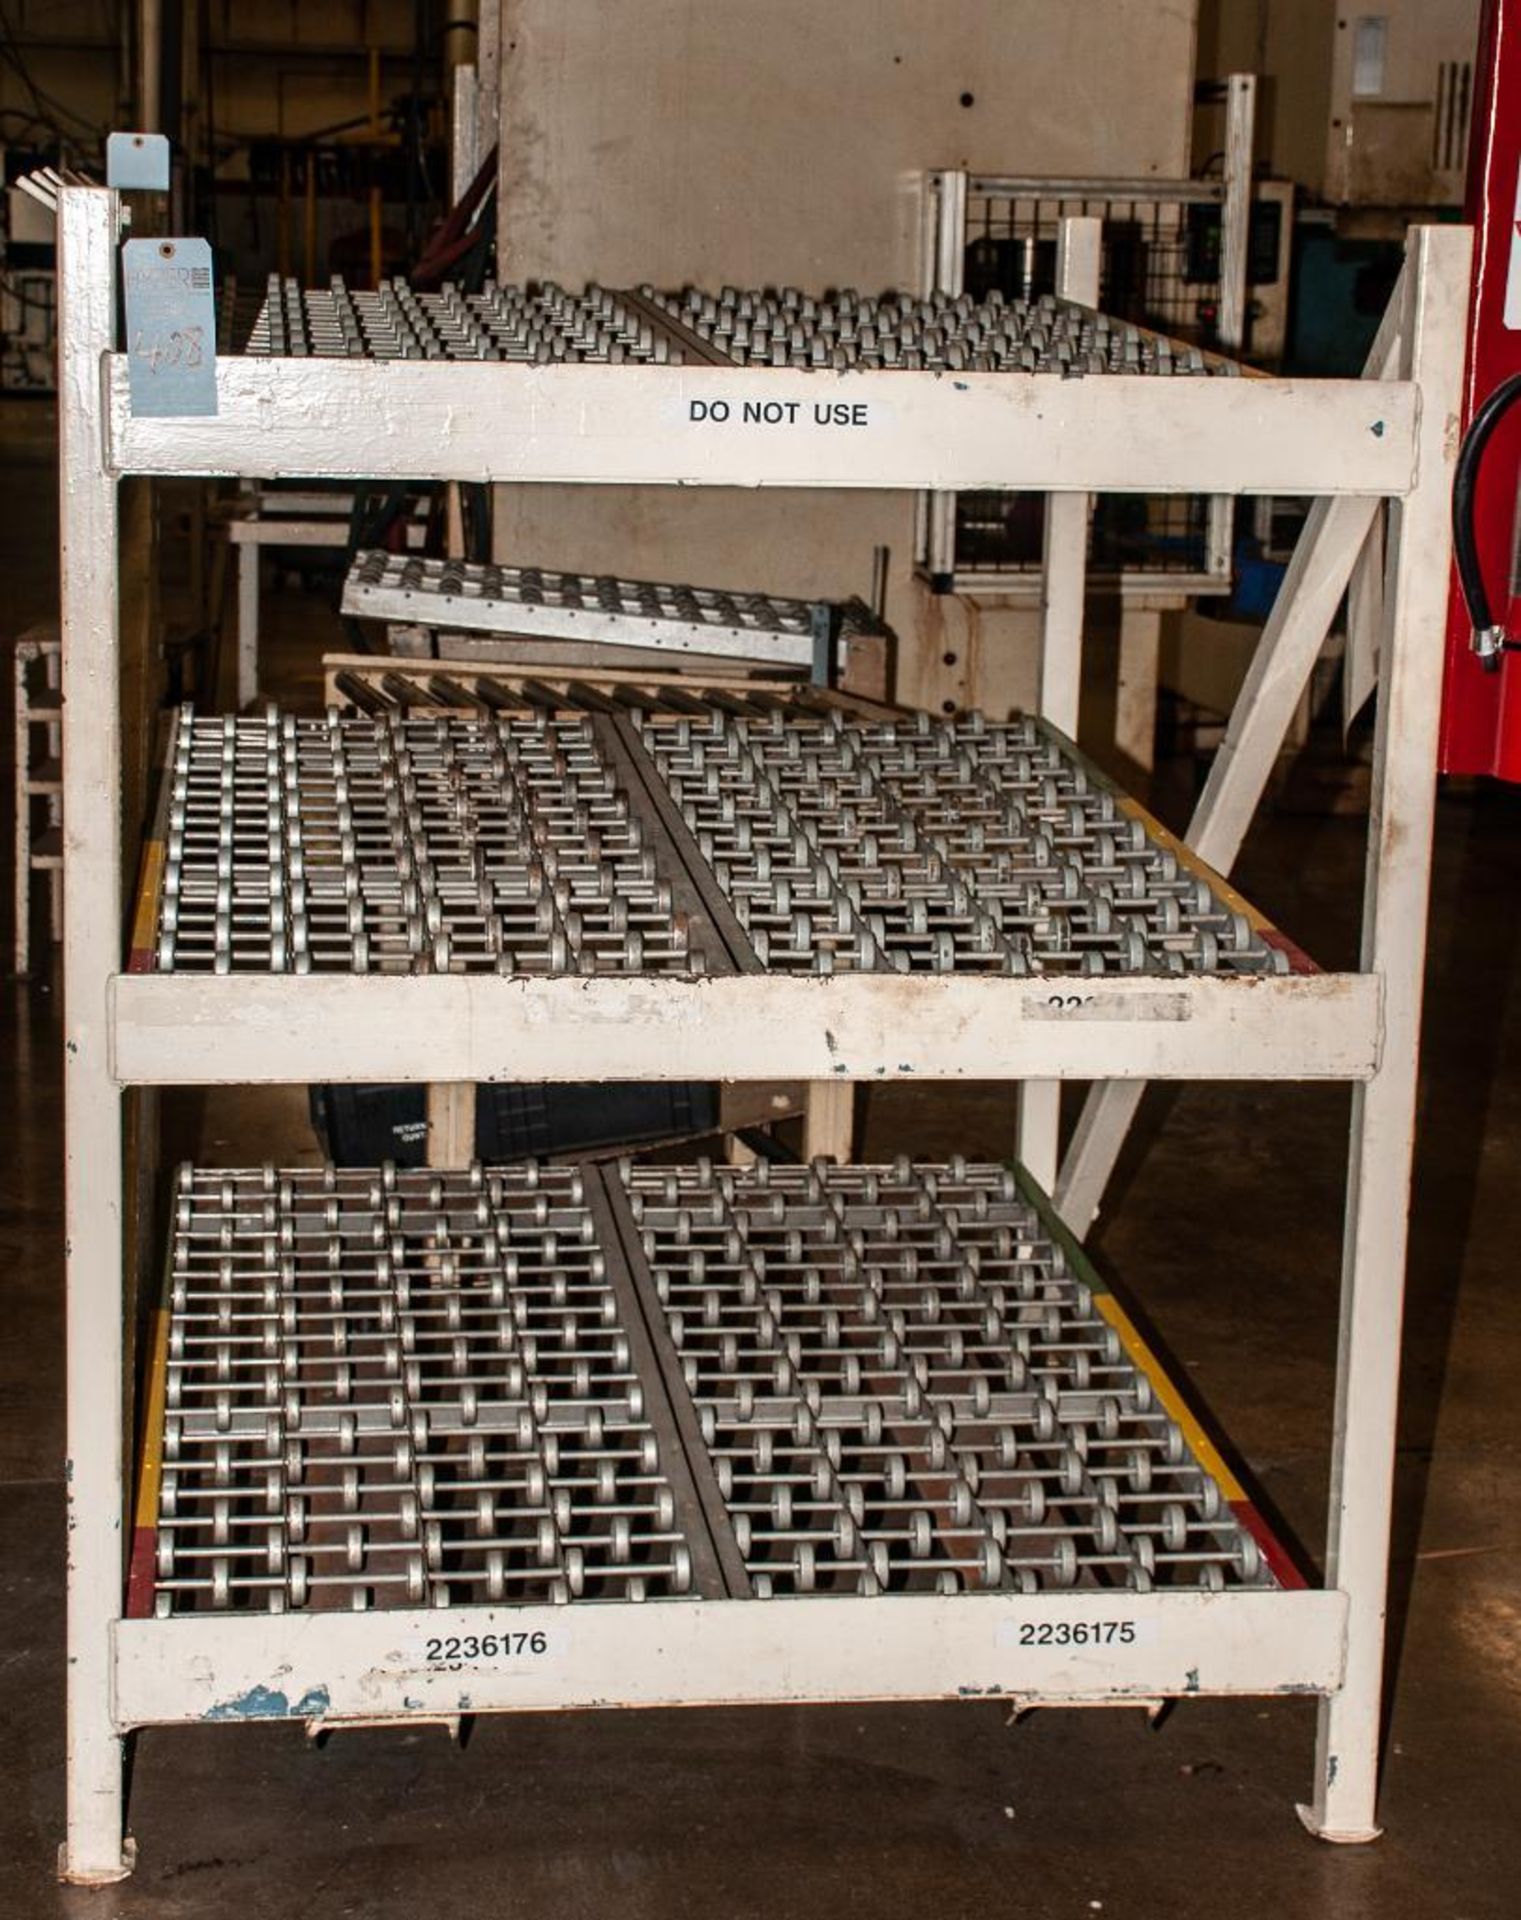 (6) Incline Wheel Conveyors, double wide x 3 rows tall, On Steel Stand Approx 52"W x 60 1/2" Long